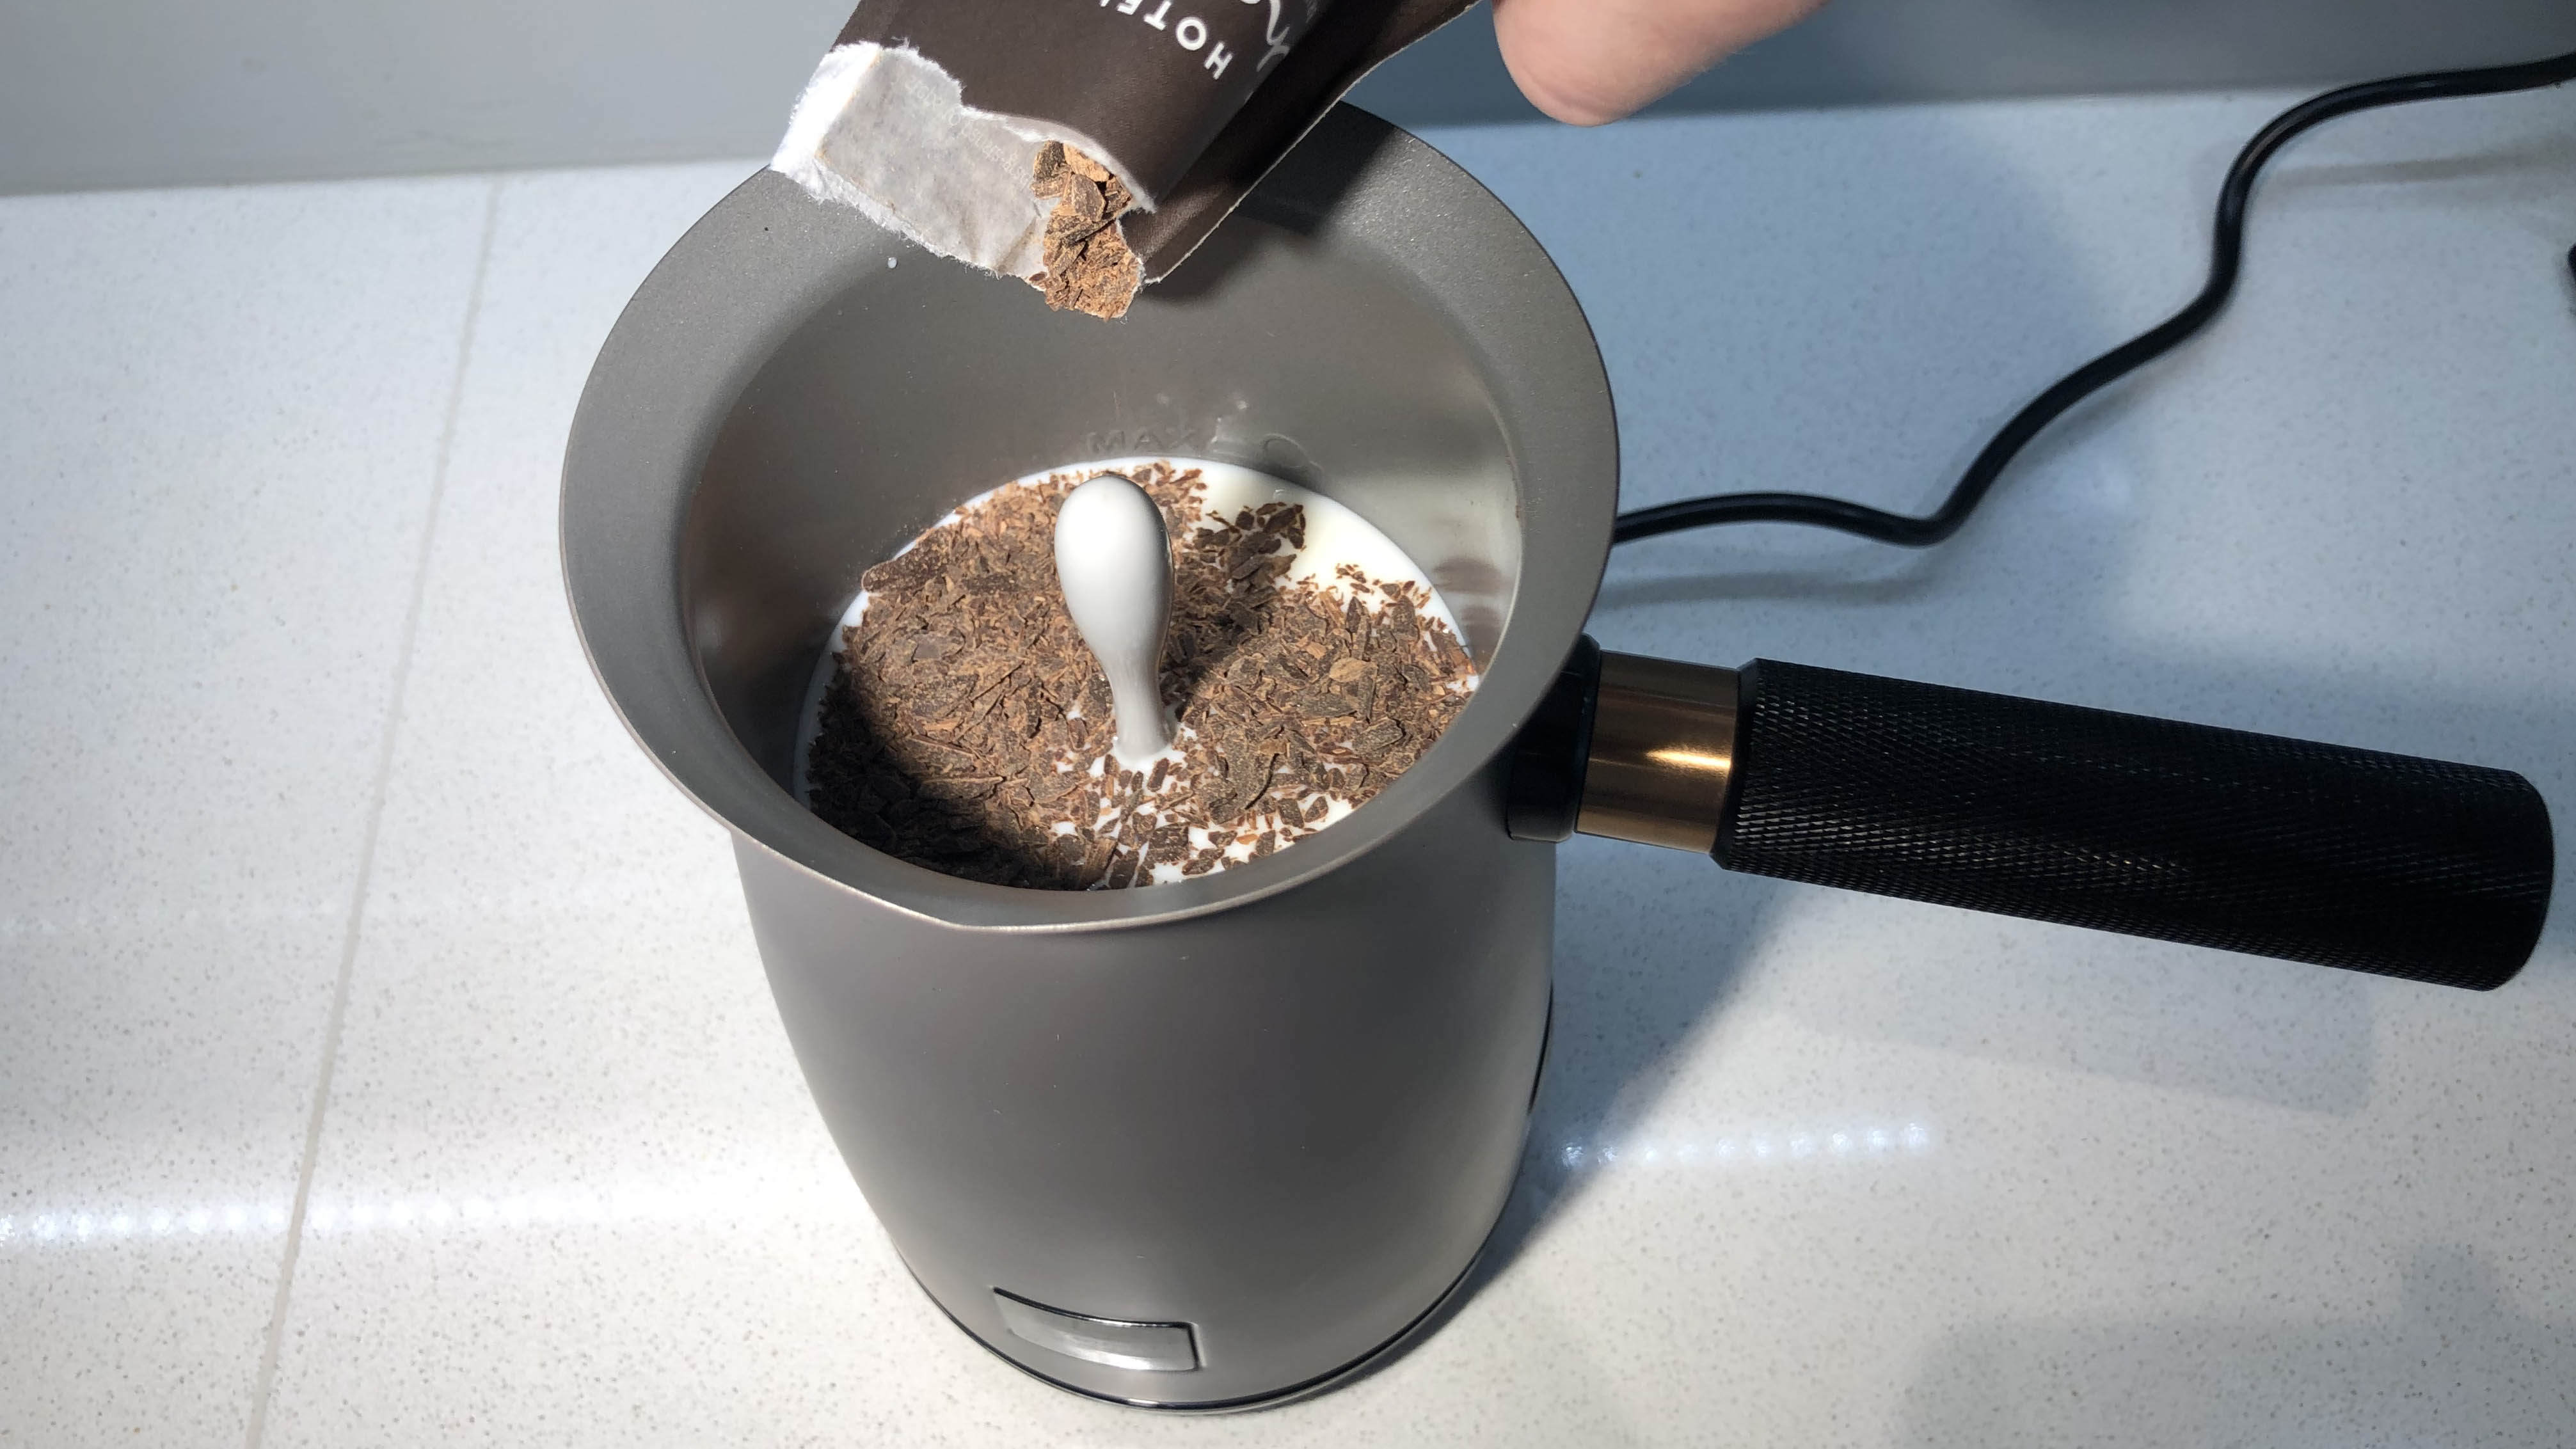 Chocolate is added to the milk in the Hotel Chocolat Velvetiser